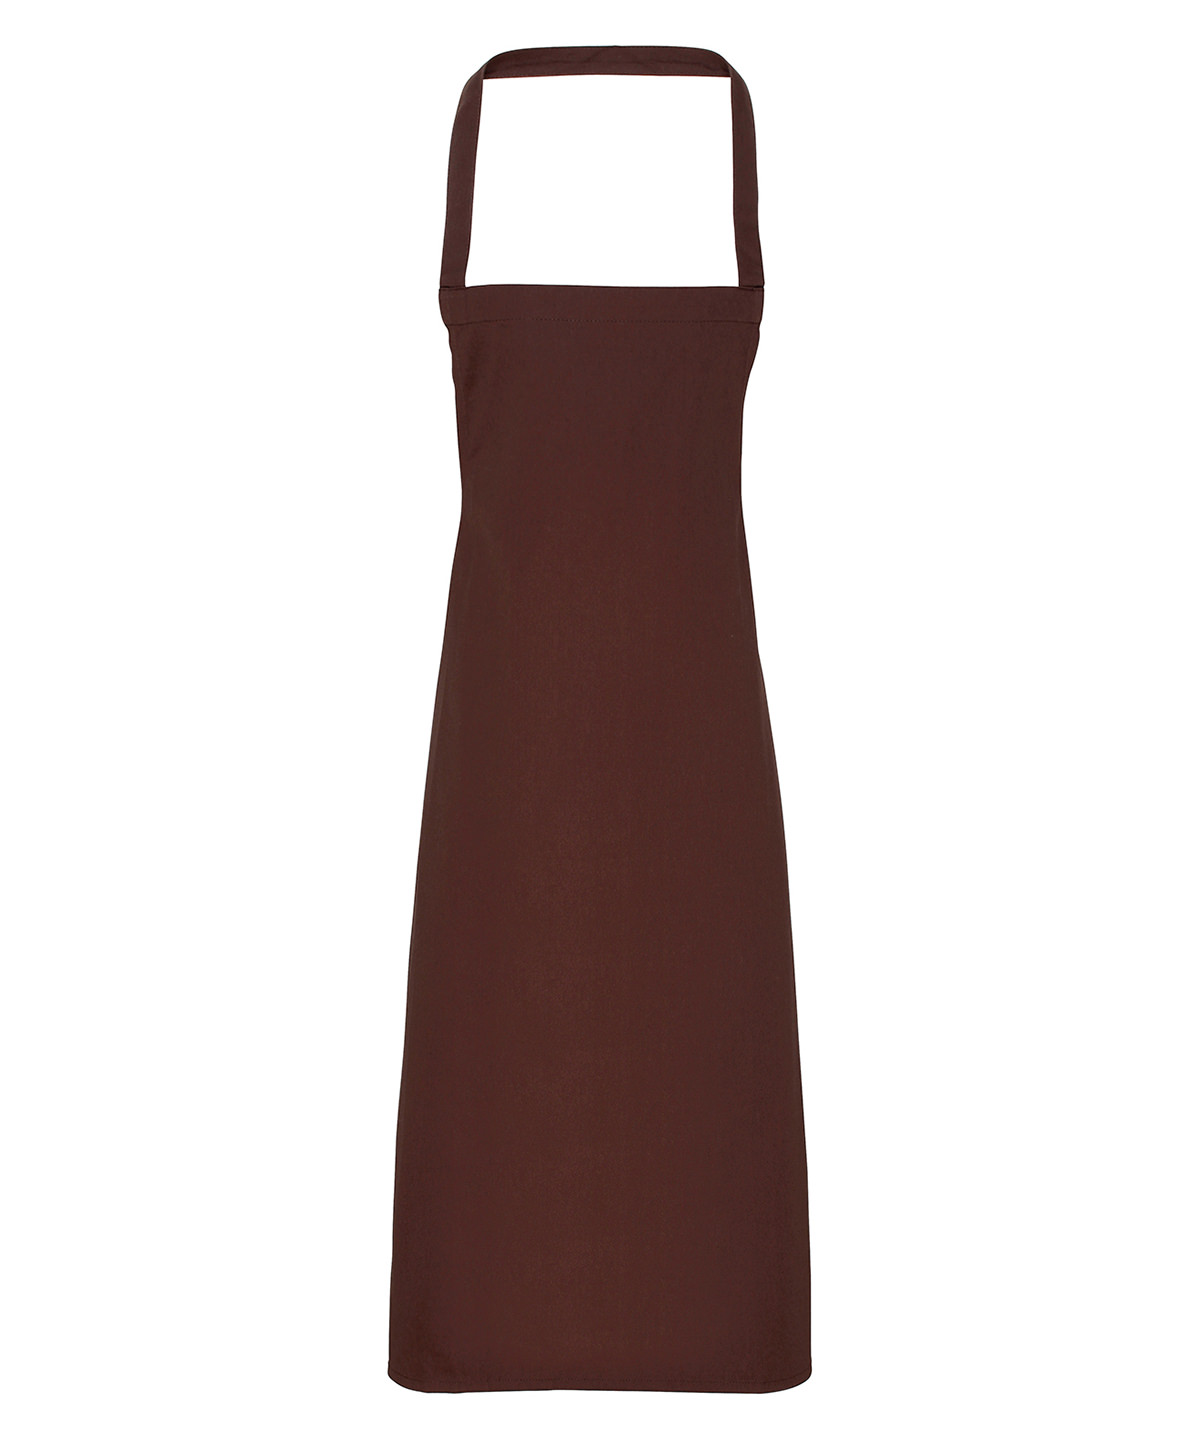 100% Cotton Apron - Organic Certified Brown Size One Size